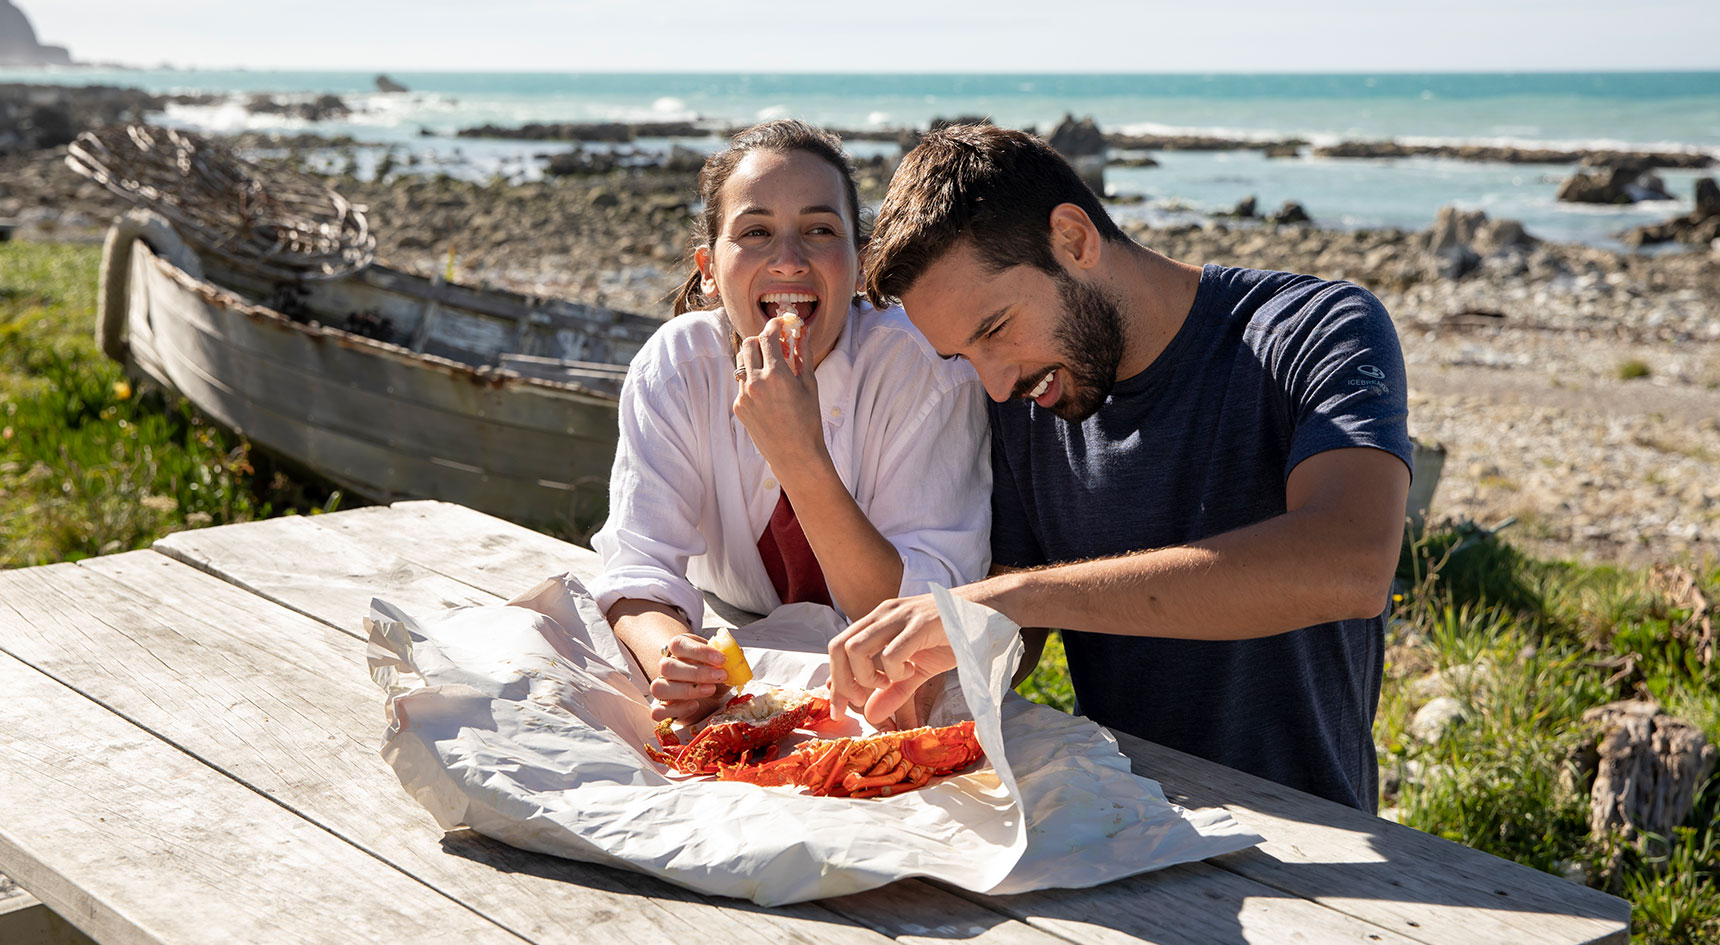 Two people enjoying fish and chips by the beach in New Zealand